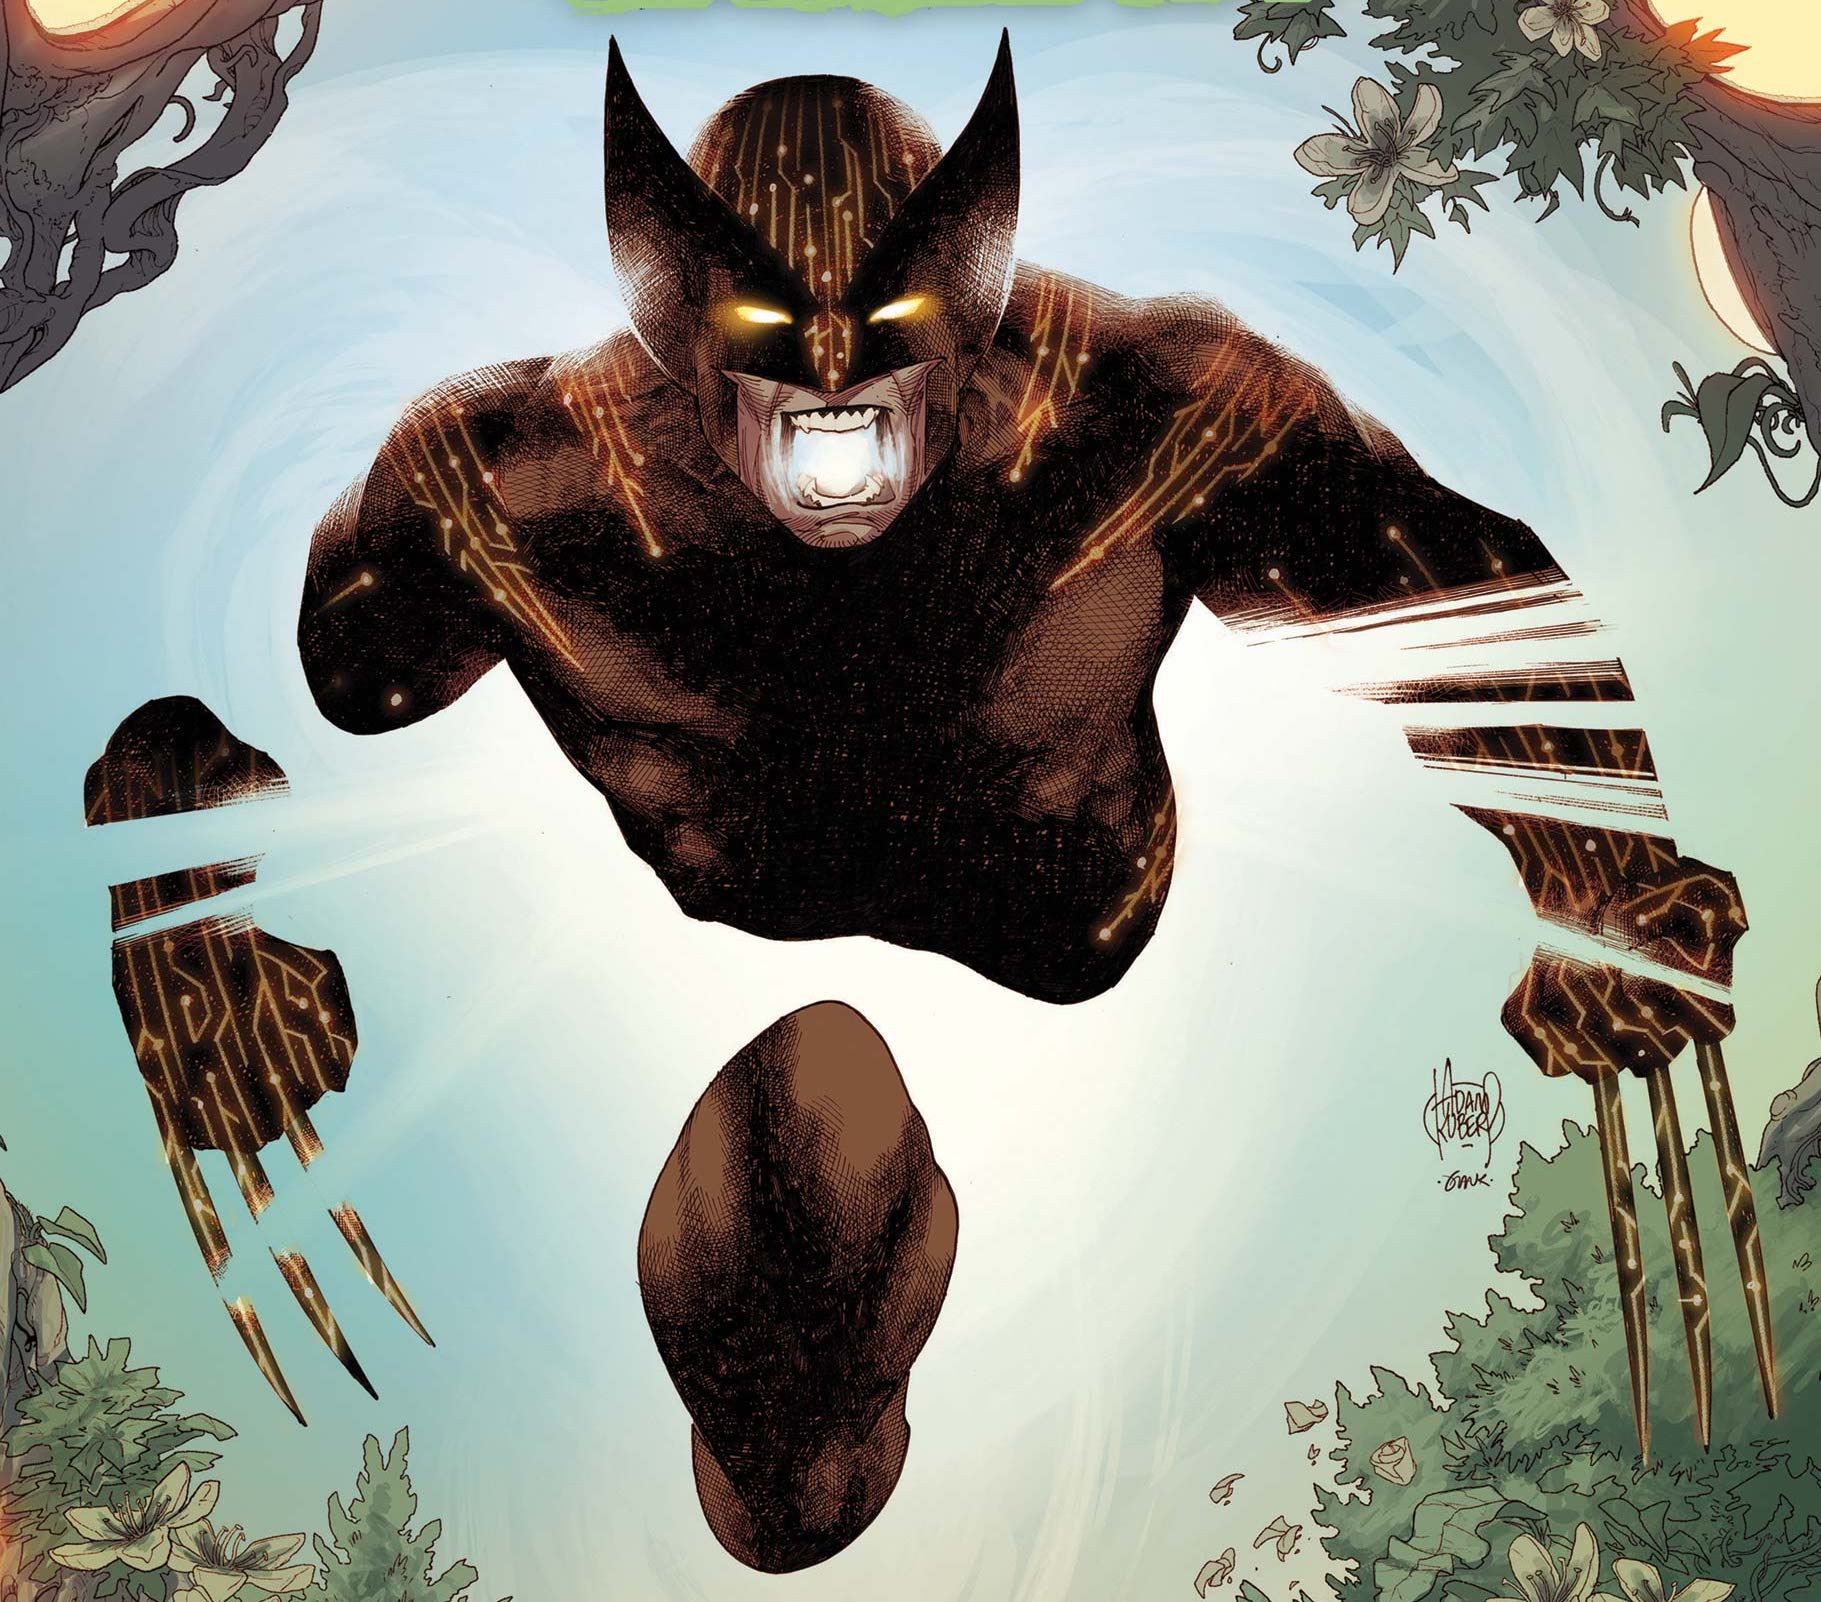 'X Deaths of Wolverine' #4 peers into the far future